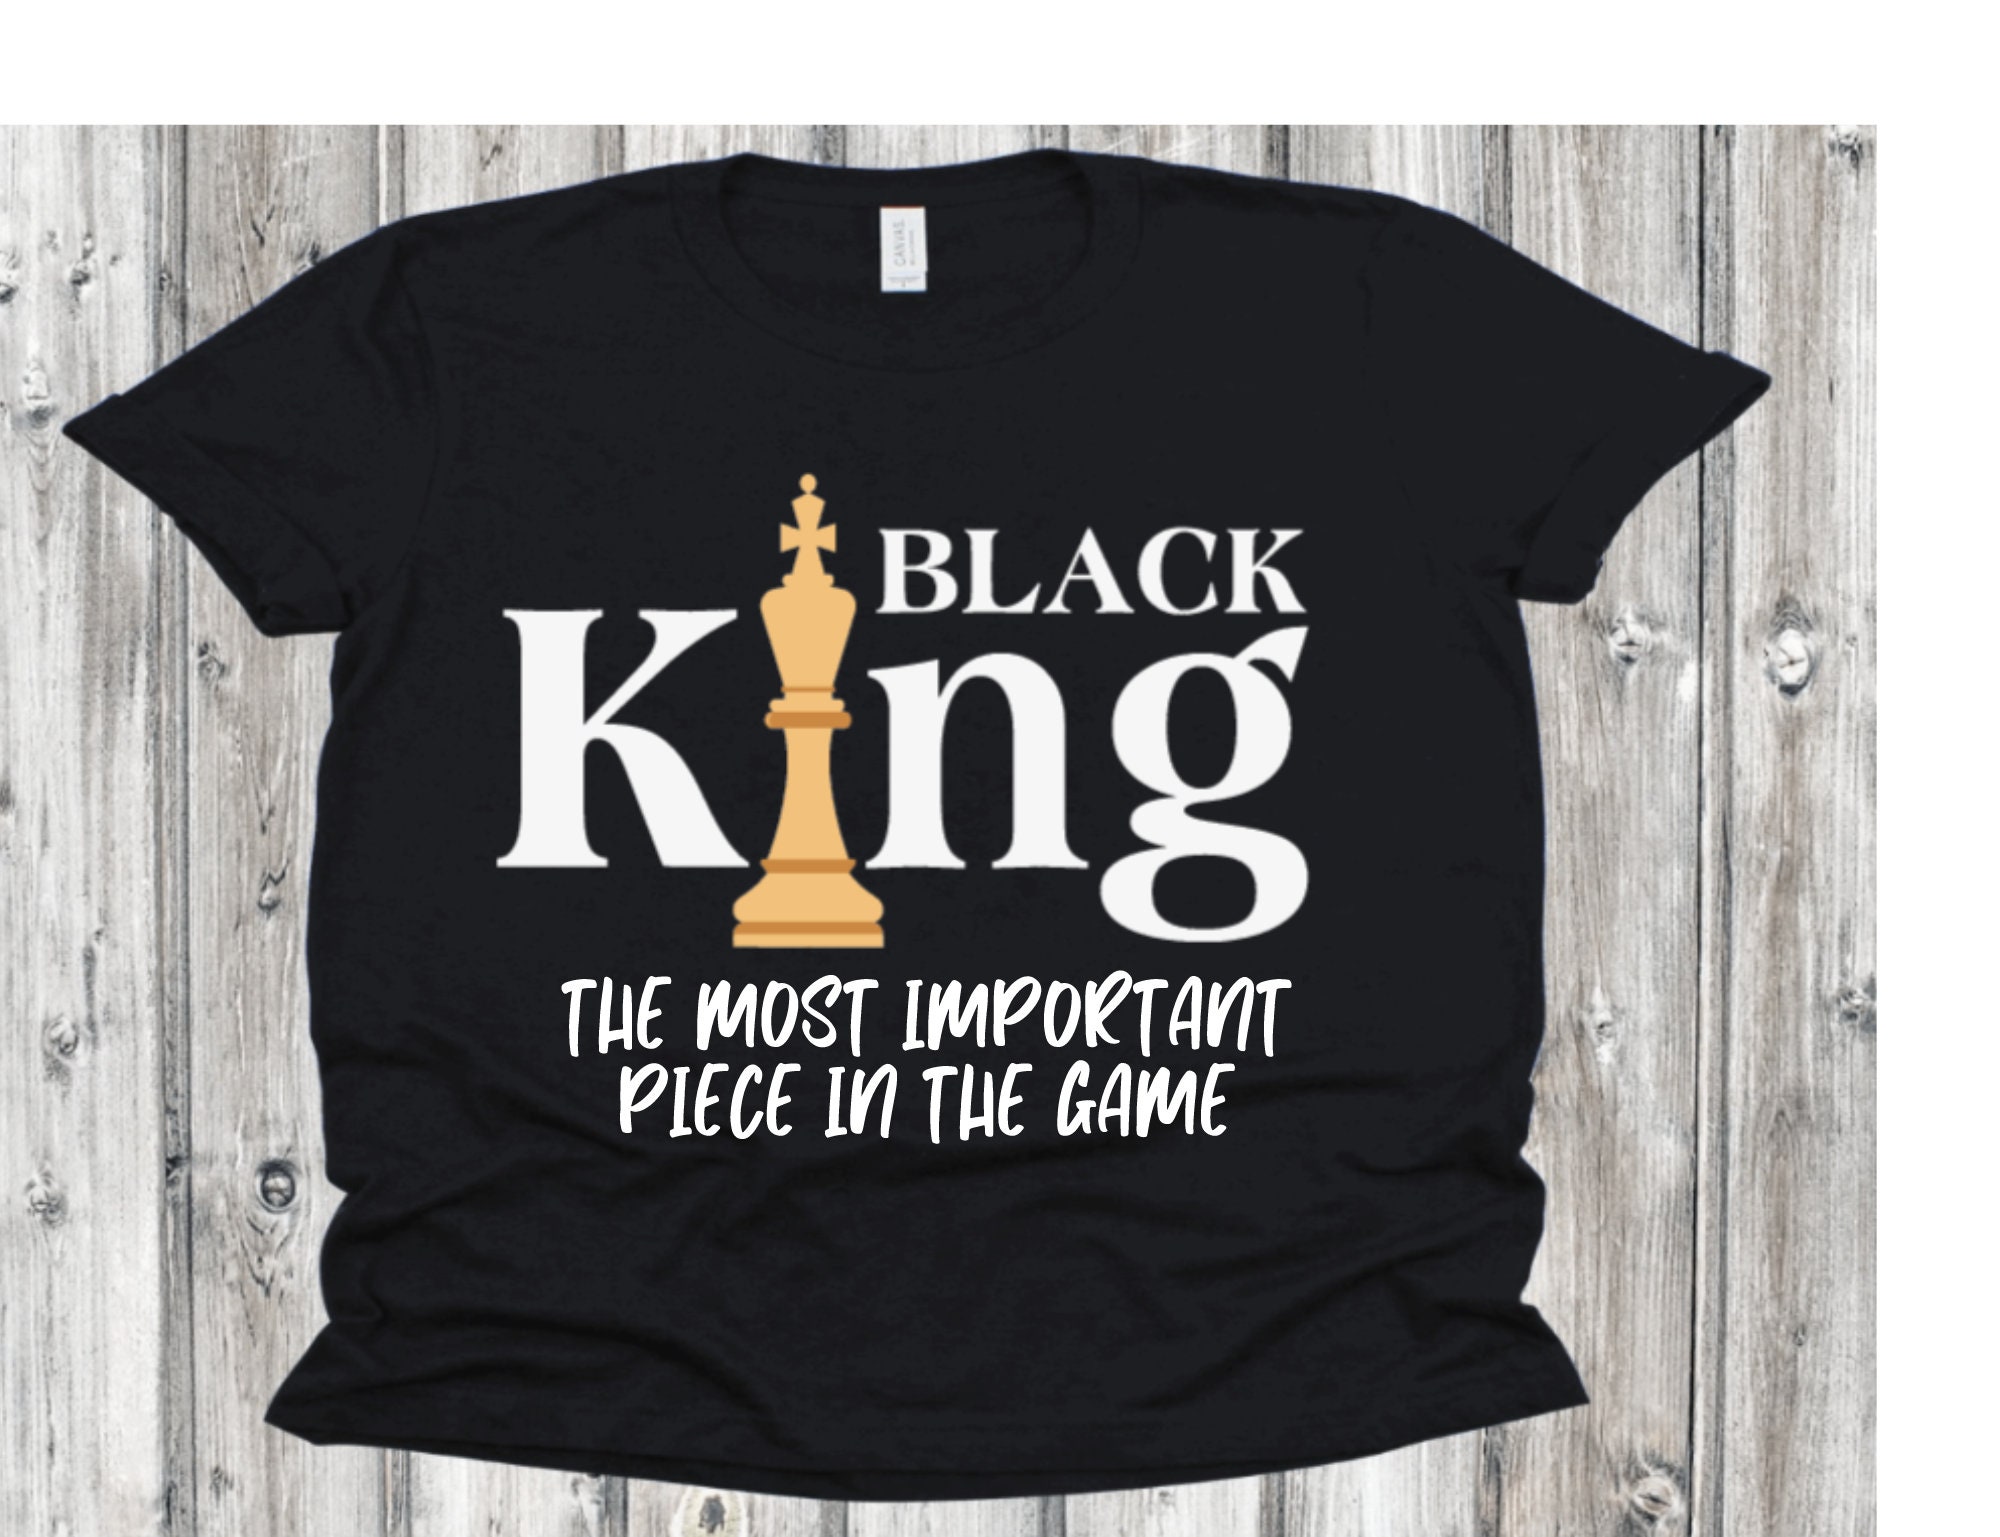  The Black King Is The Strongest Figure In The Game